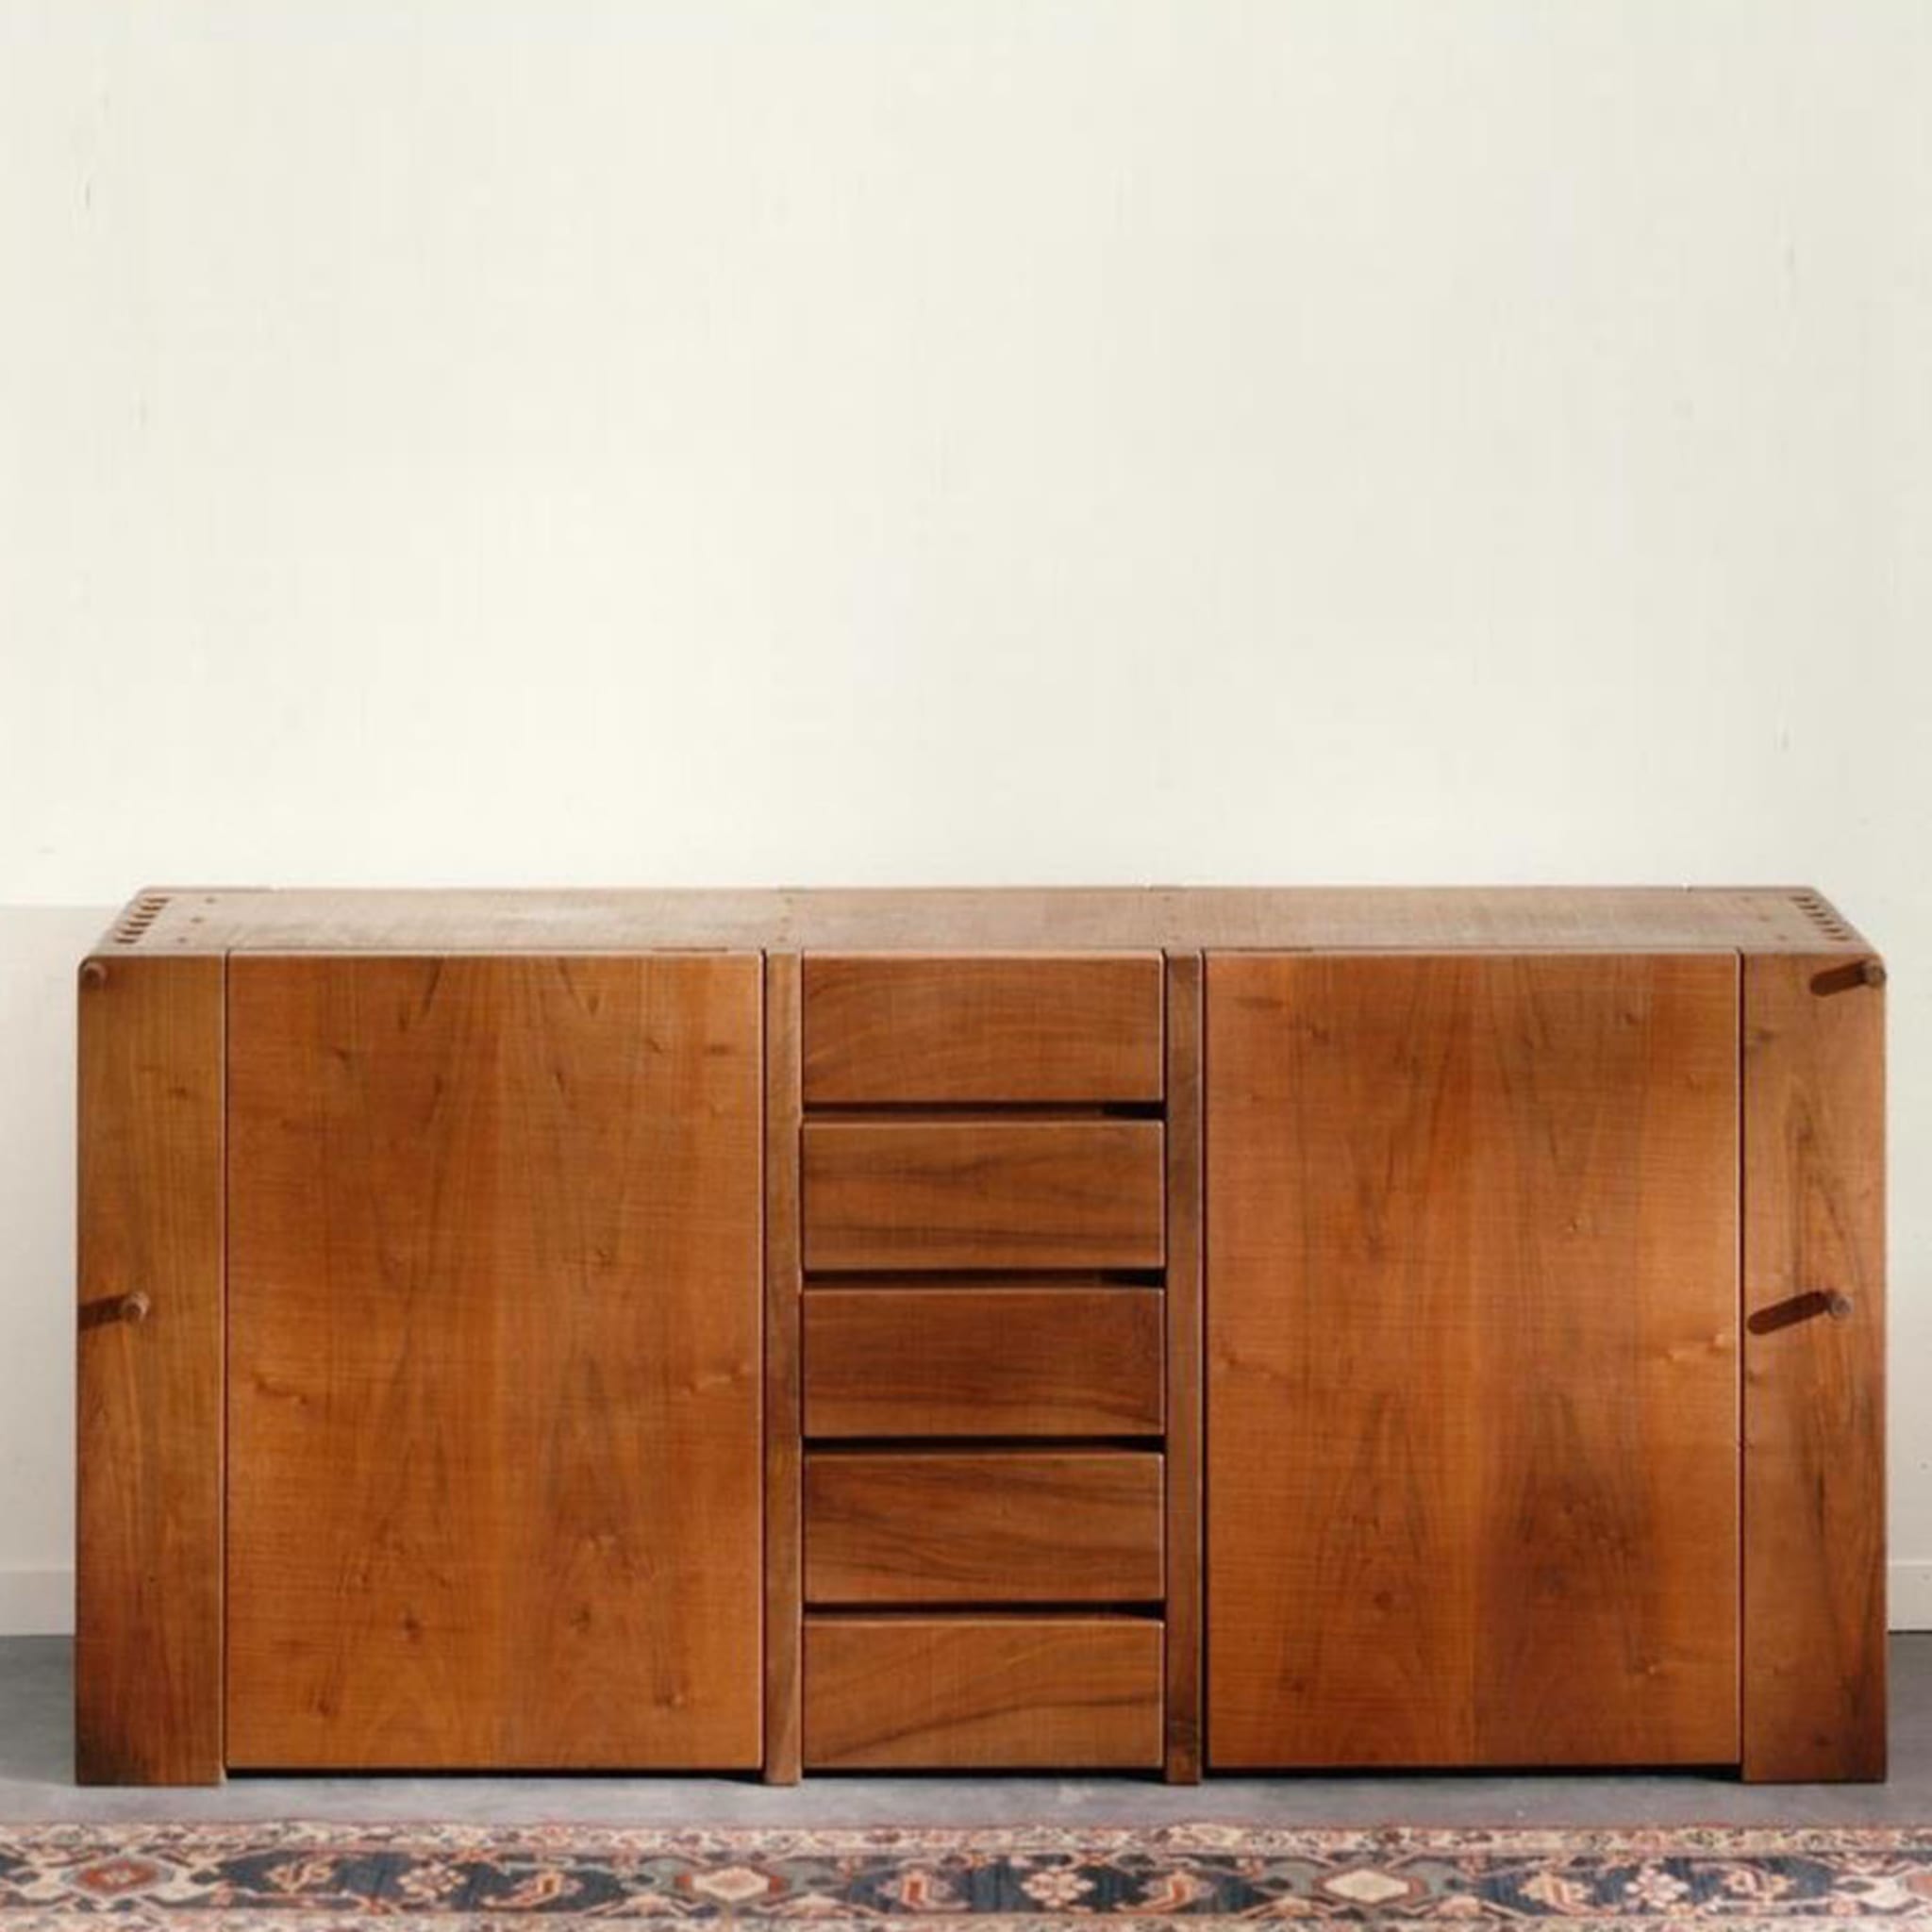 Del Transetto 2-Door Walnut Sideboard with Drawers - Alternative view 1